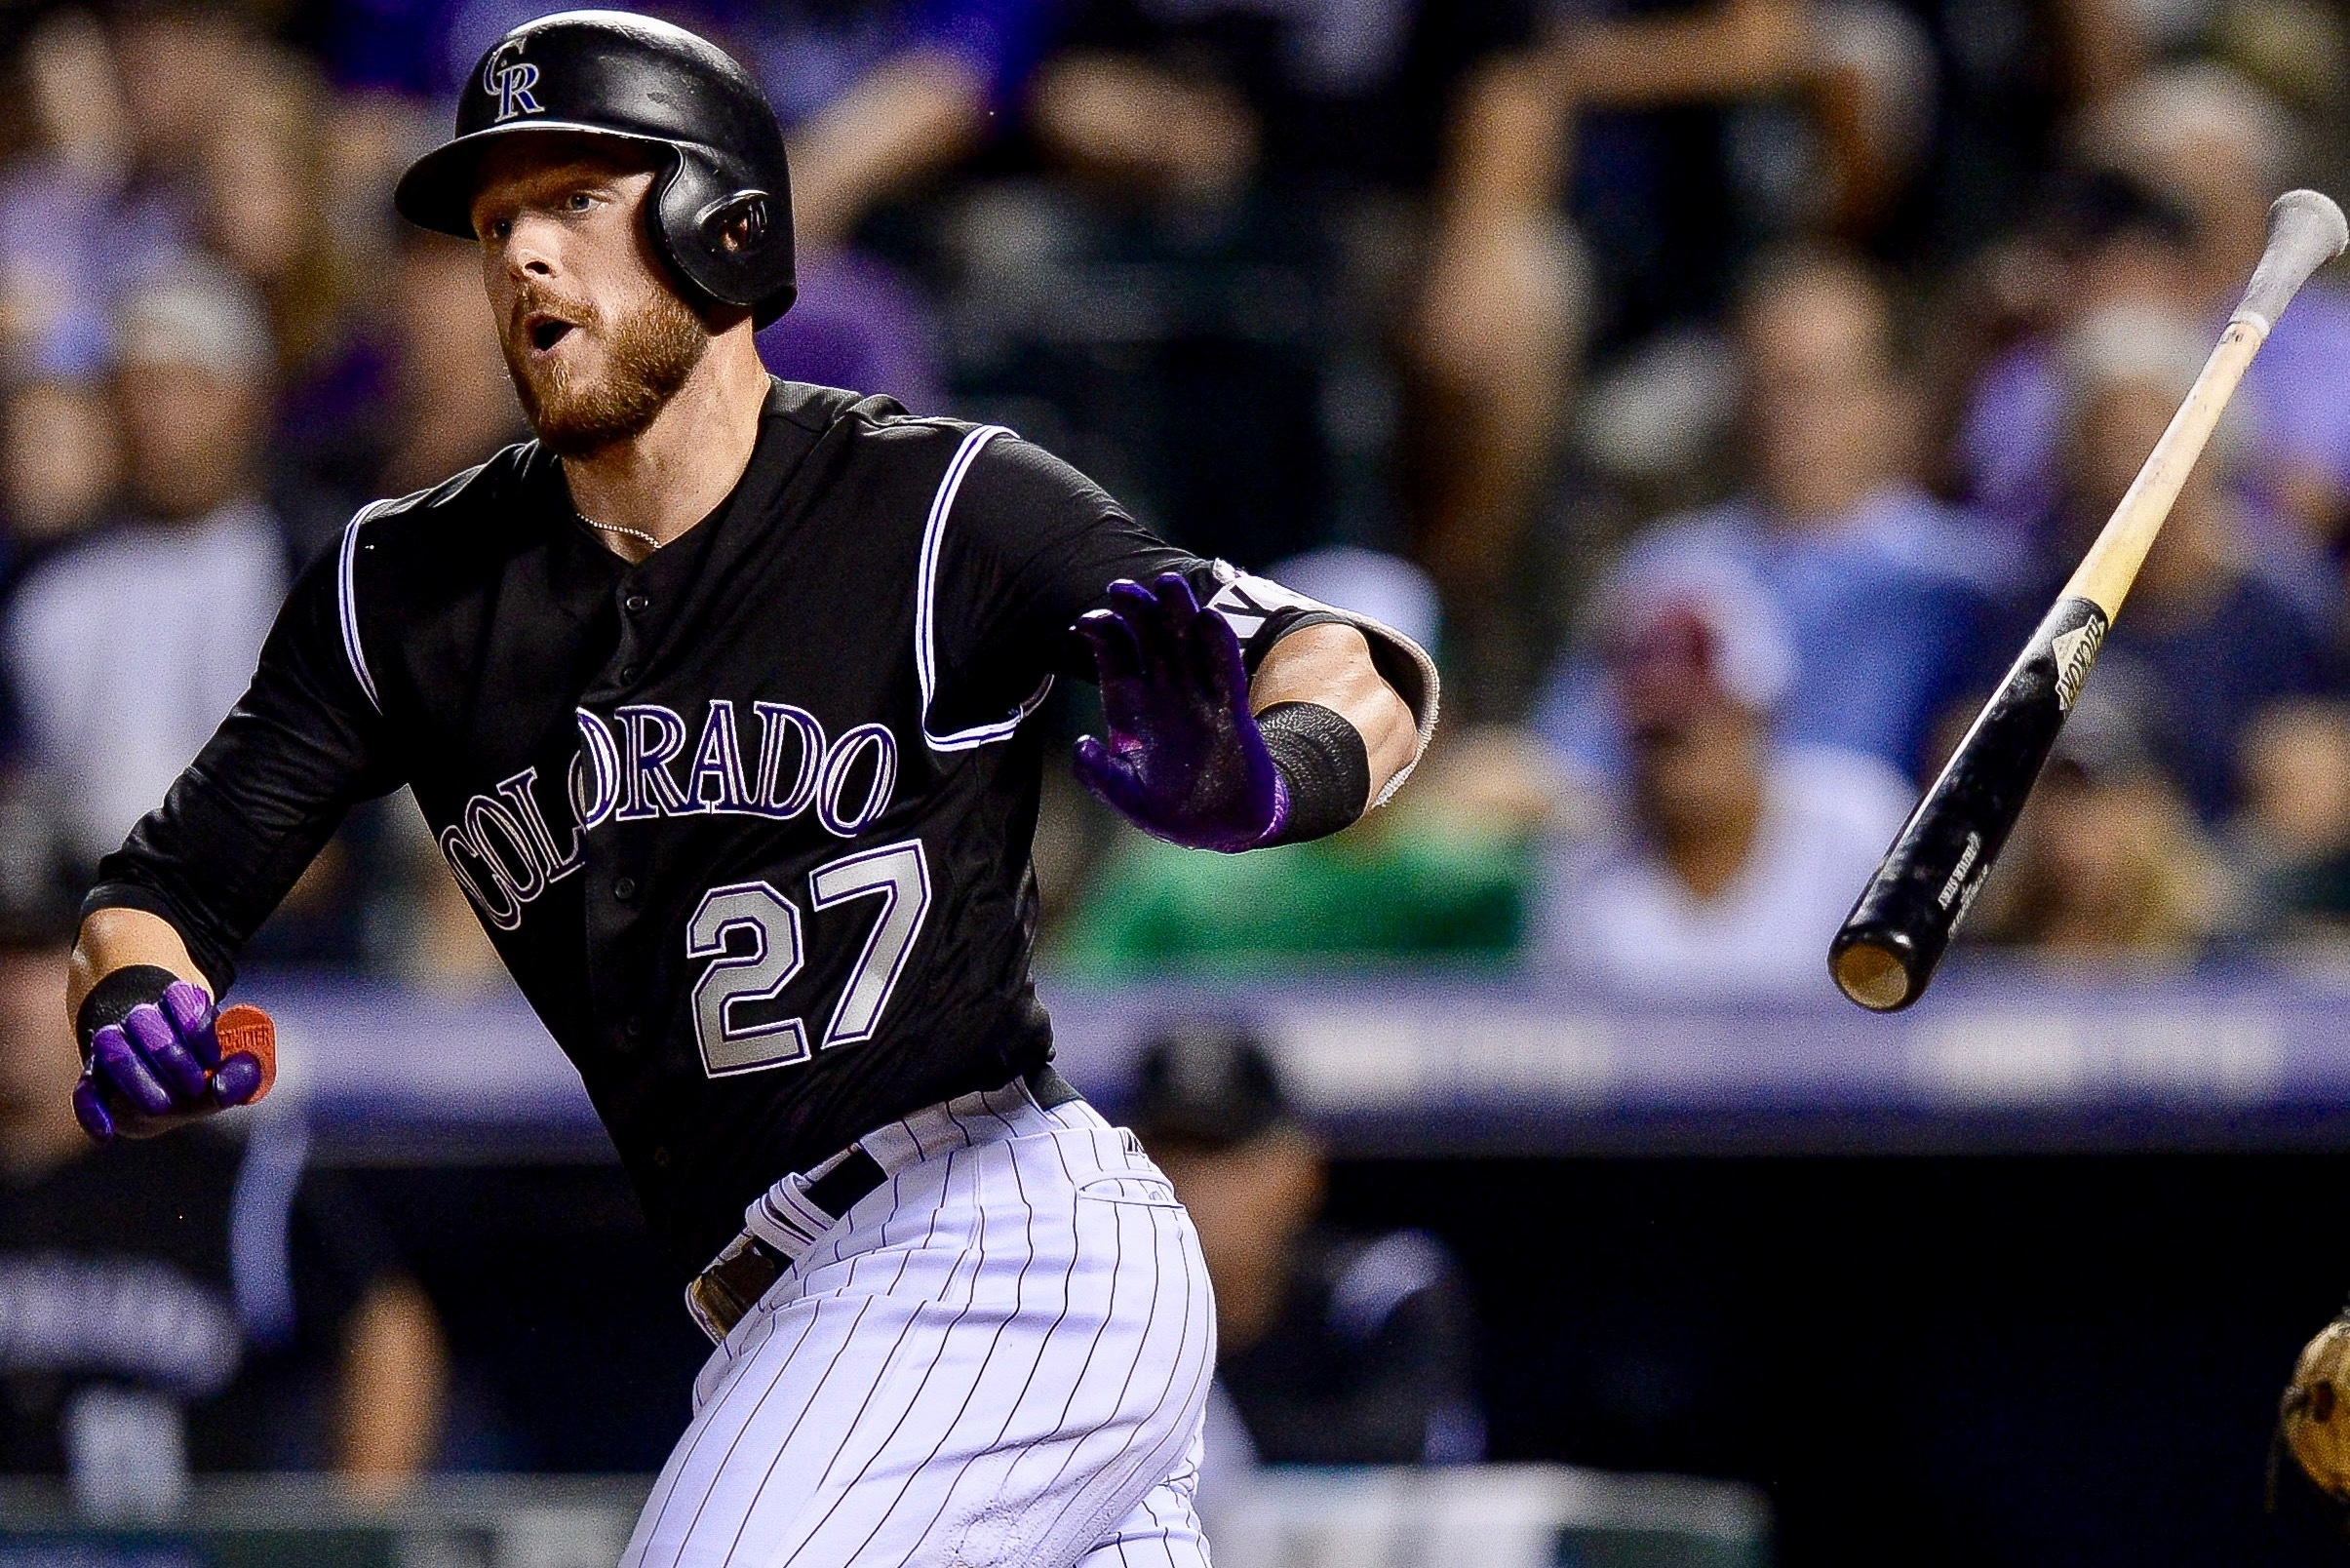 Different day, same Story! Trevor Story hits a GRAND SLAM! His